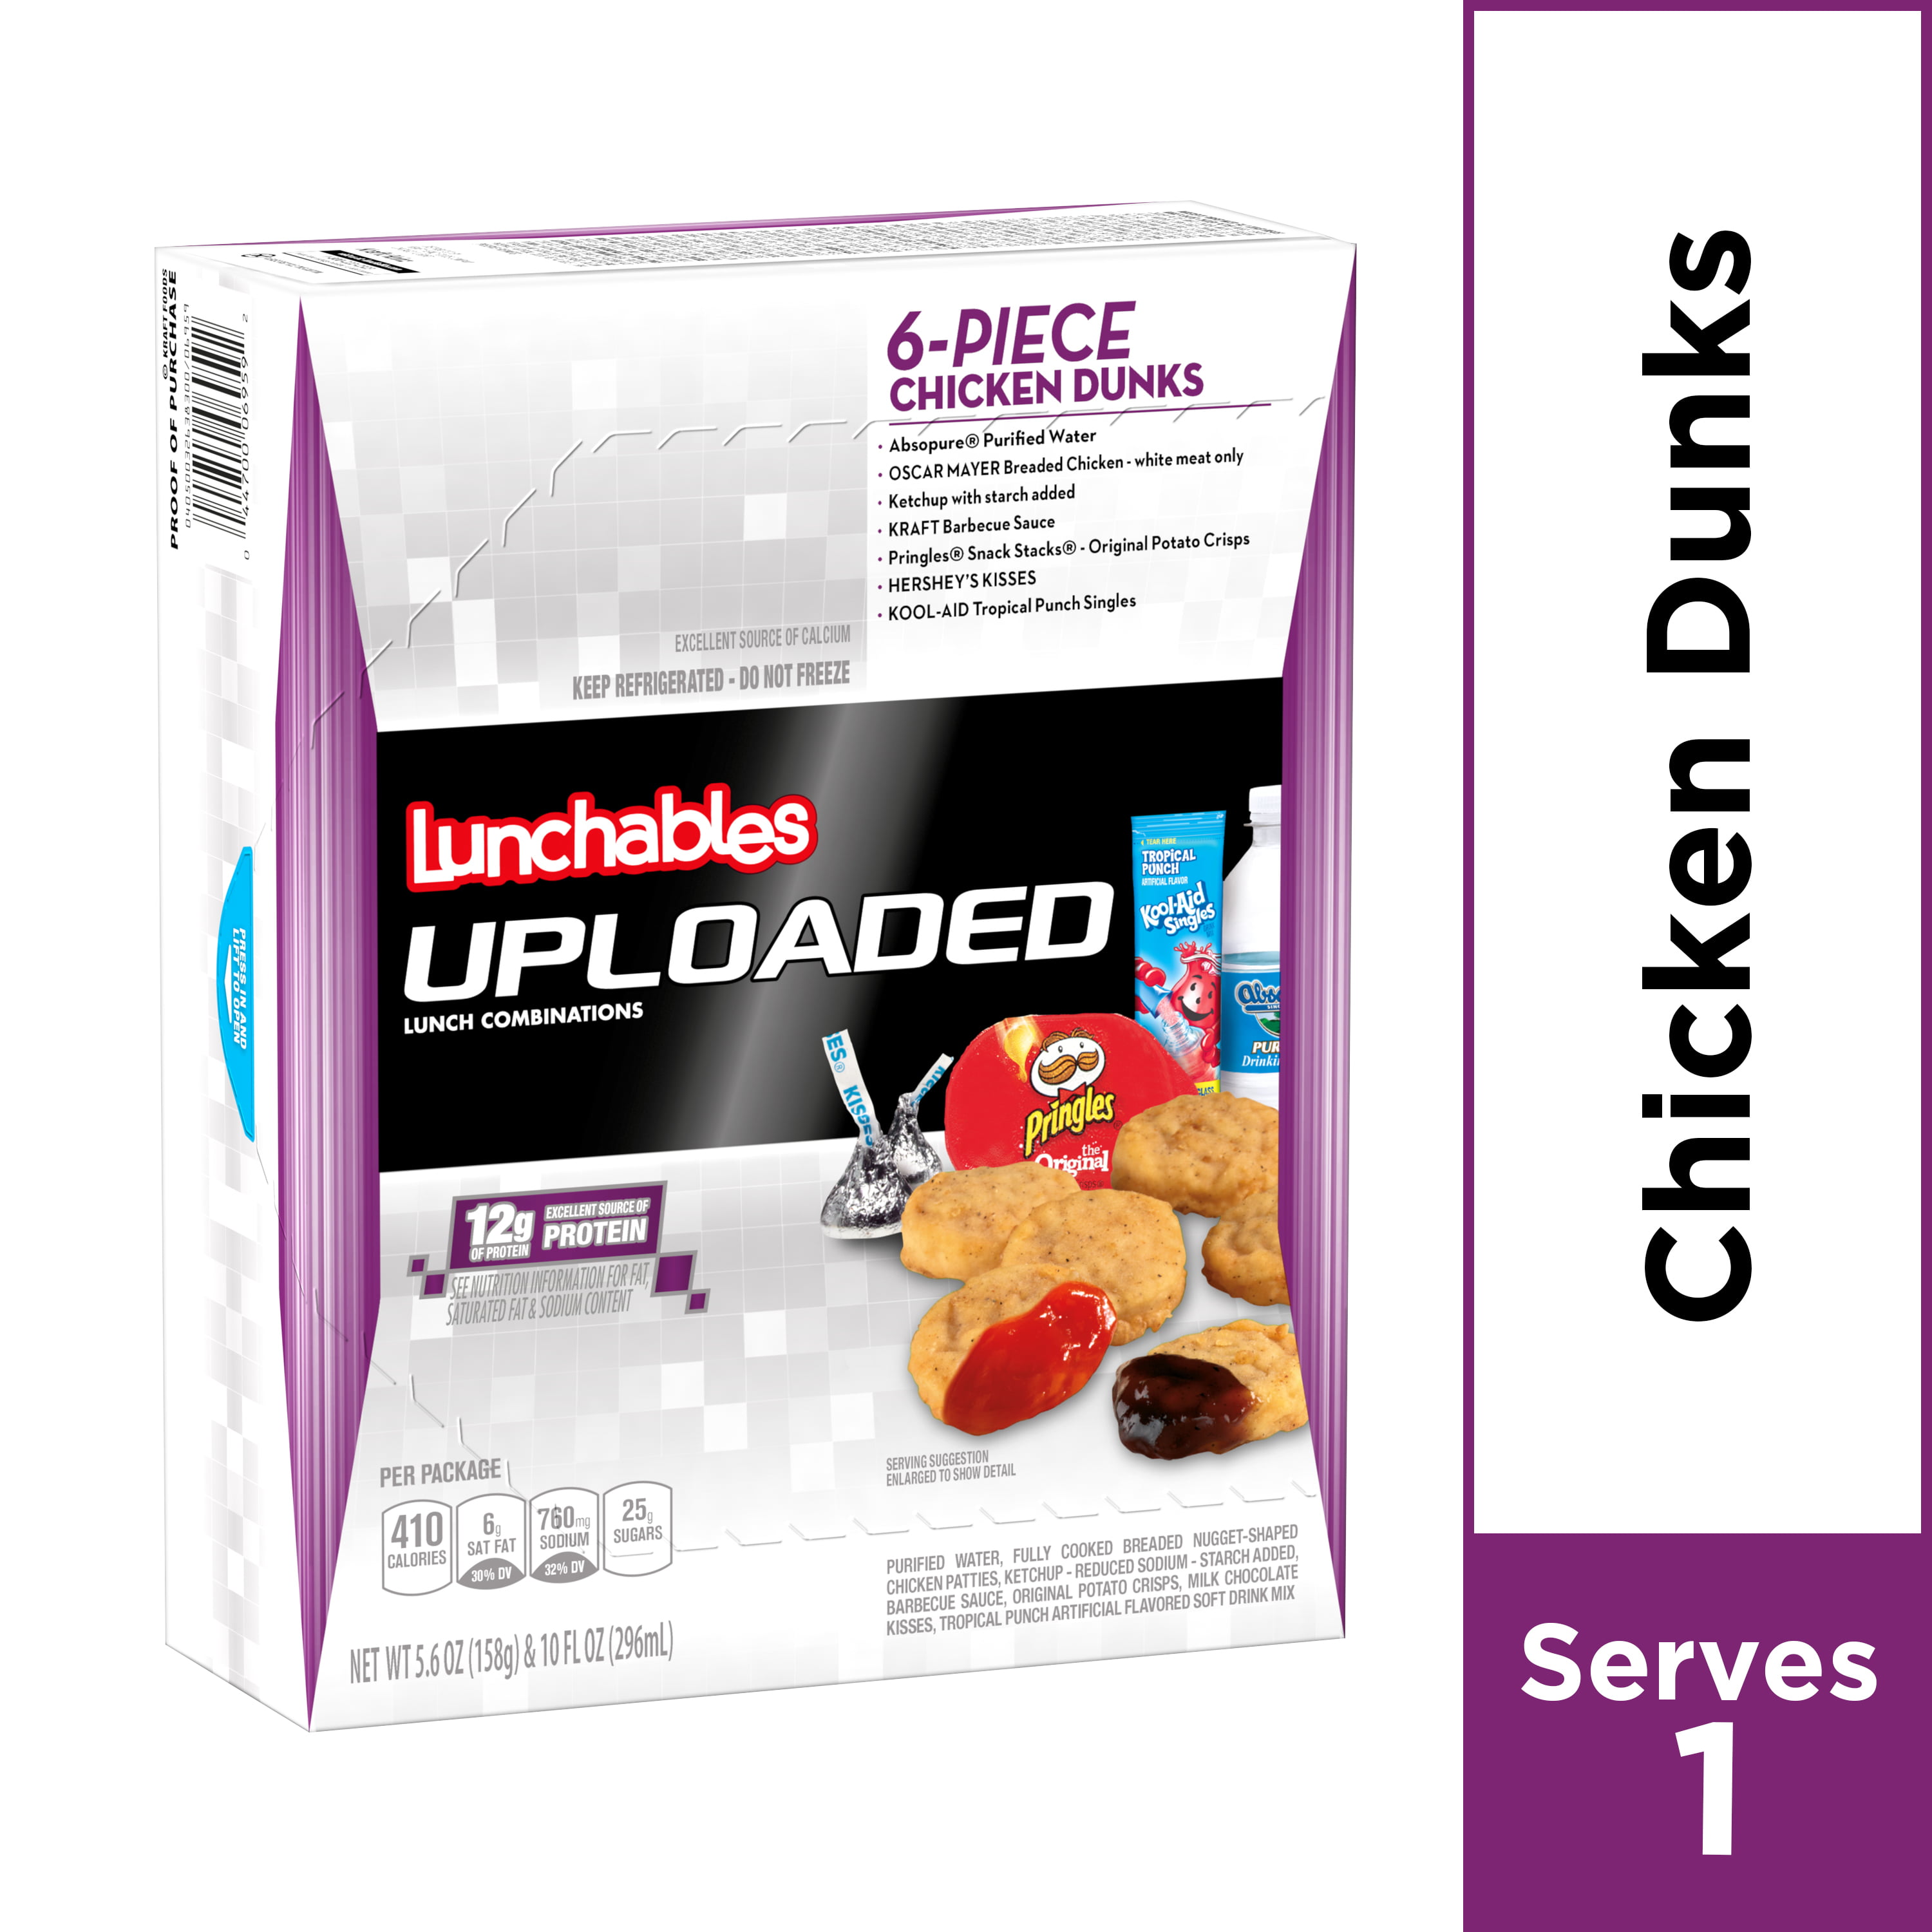 Lunchables Uploaded 6 Piece Chicken Dunks, 15.6 oz Box